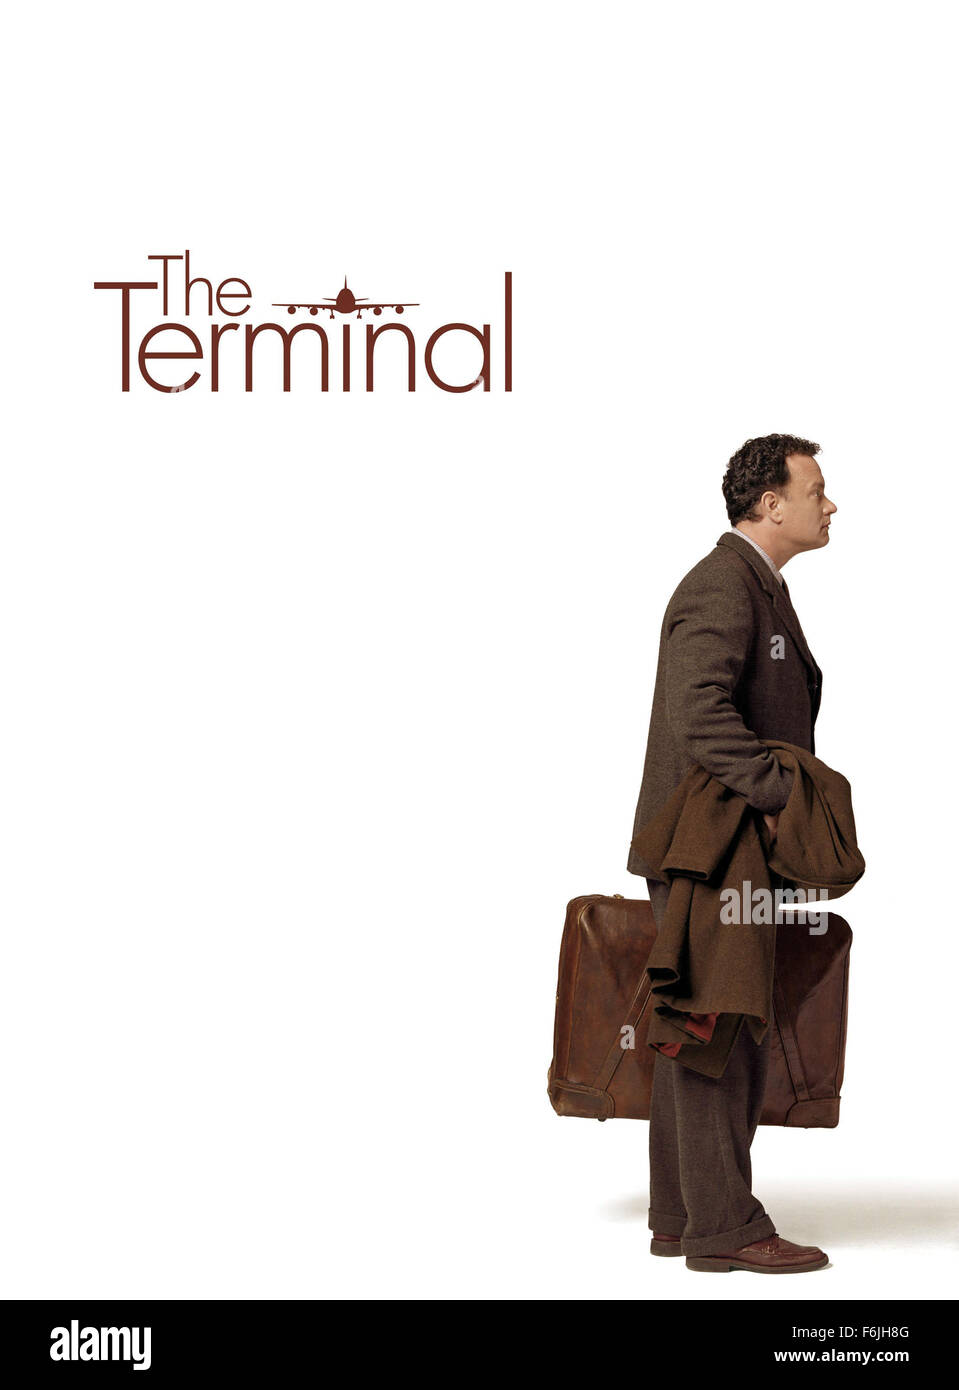 RELEASE DATE: June 18, 2004. MOVIE TITLE: The Terminal. STUDIO: DreamWorks SKG. PLOT: Viktor Navorski, a man from an Eastern European country arrives in New York. However after he left his country war broke out. Suddenly Navorski is a man without a country - or one that the U.S. cannot recognize, thus he is denied entrance to the U.S. However, he also can't be deported so he is told by the Security Manager that he has to remain in the airport until his status can be fixed. PICTURED: TOM HANKS as Viktor Navorski. Stock Photo